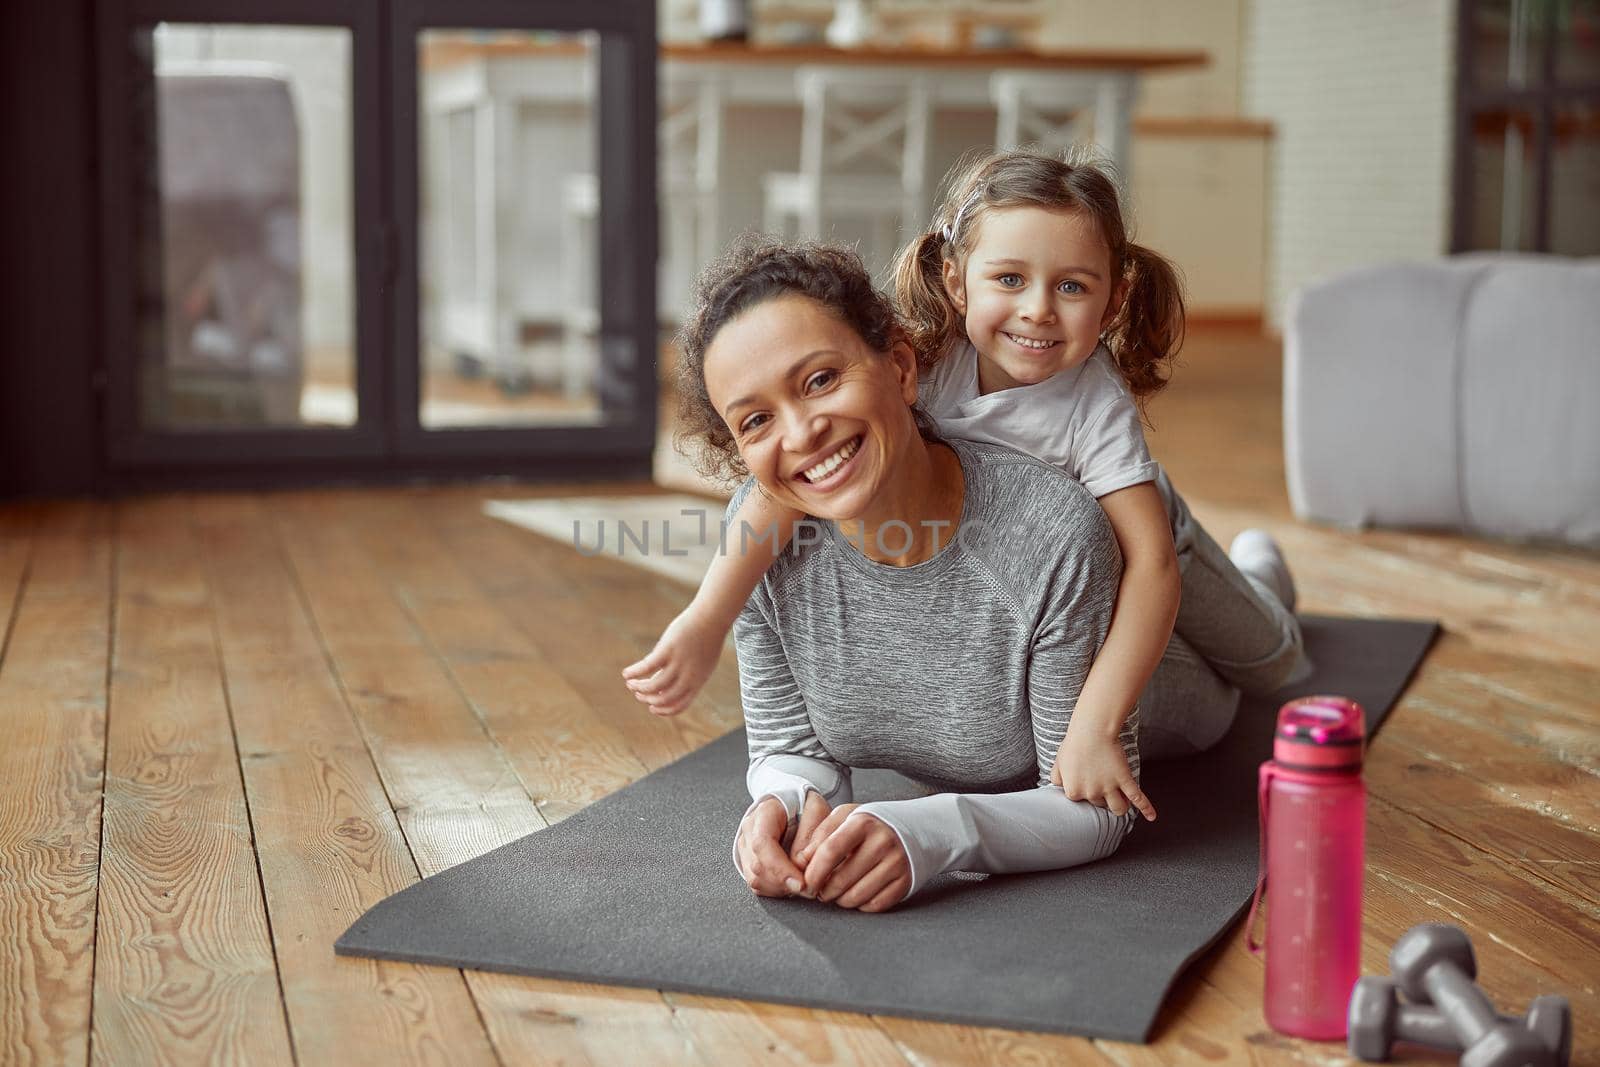 Waist up portrait of smiling woman and girl lying on mat at home while doing training